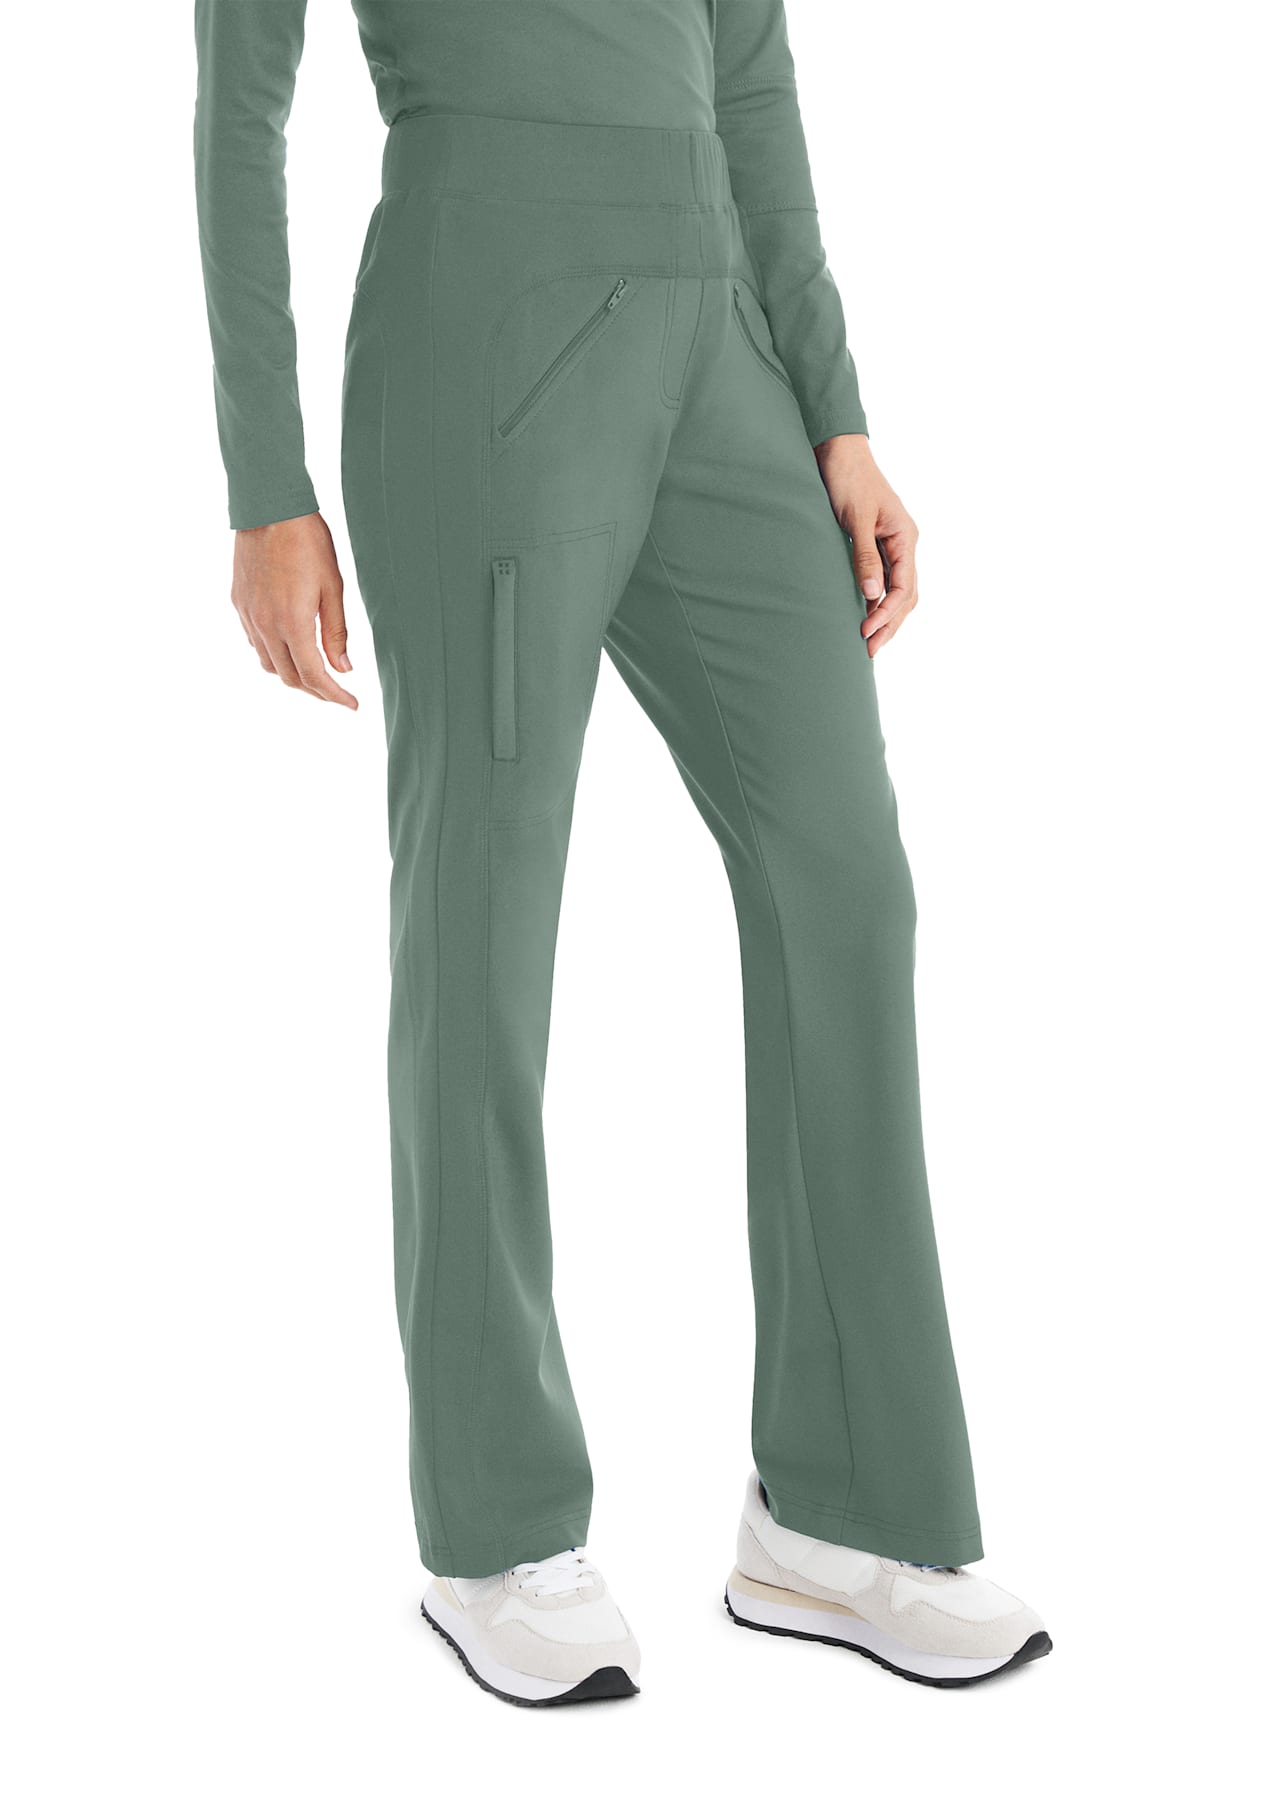 Advantage - Petite Full Length Leggings with Pockets in Bamboo Green